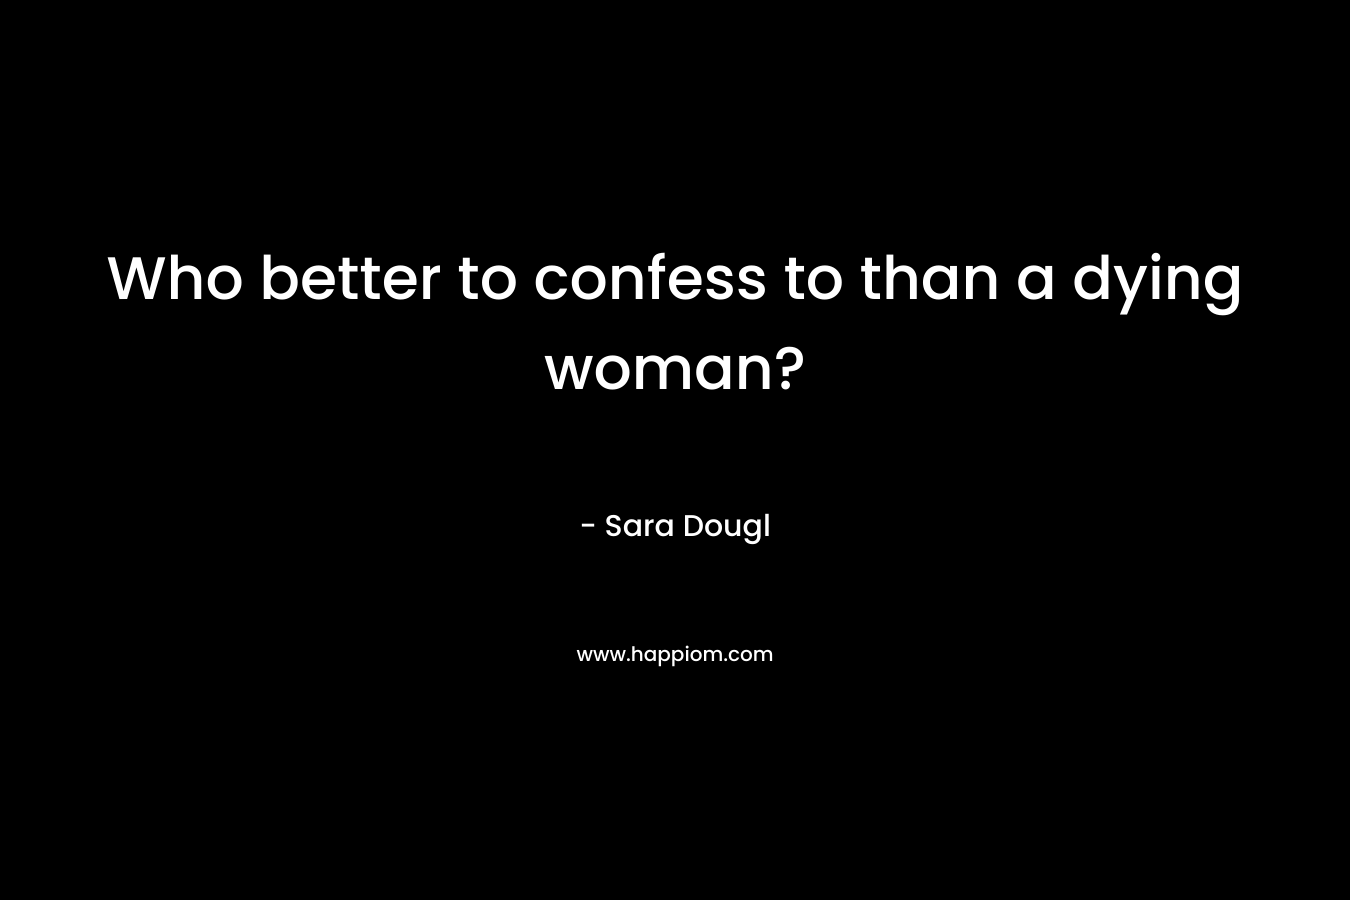 Who better to confess to than a dying woman? – Sara Dougl